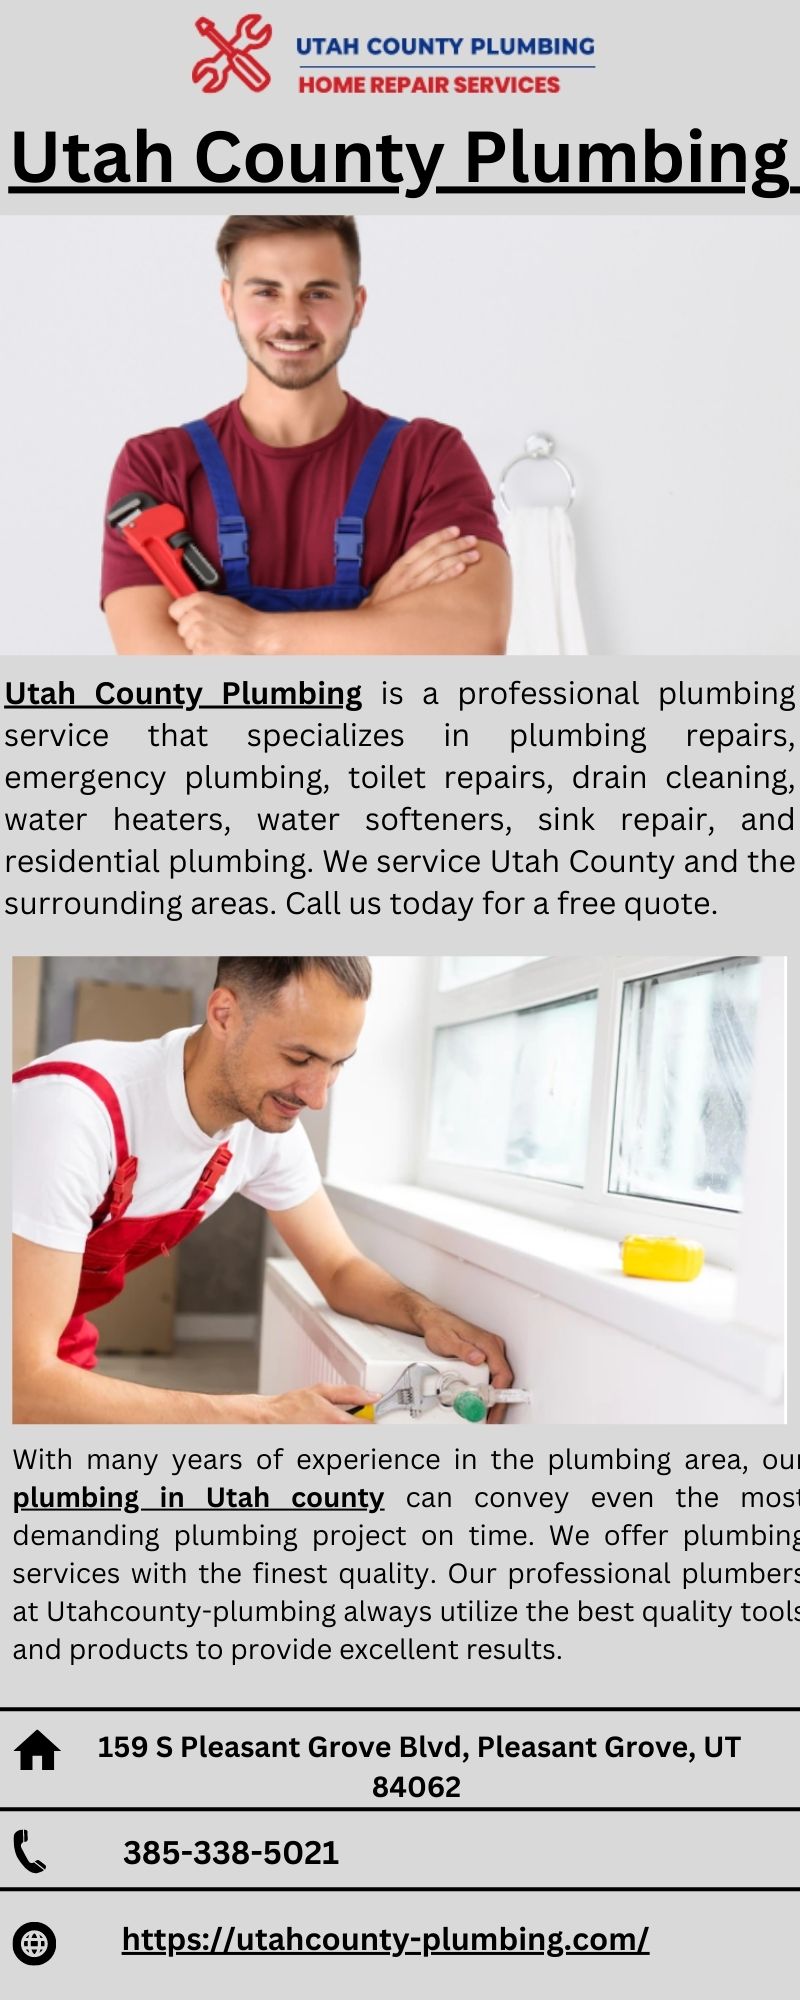 Get The Best Services For Plumbing in Utah County